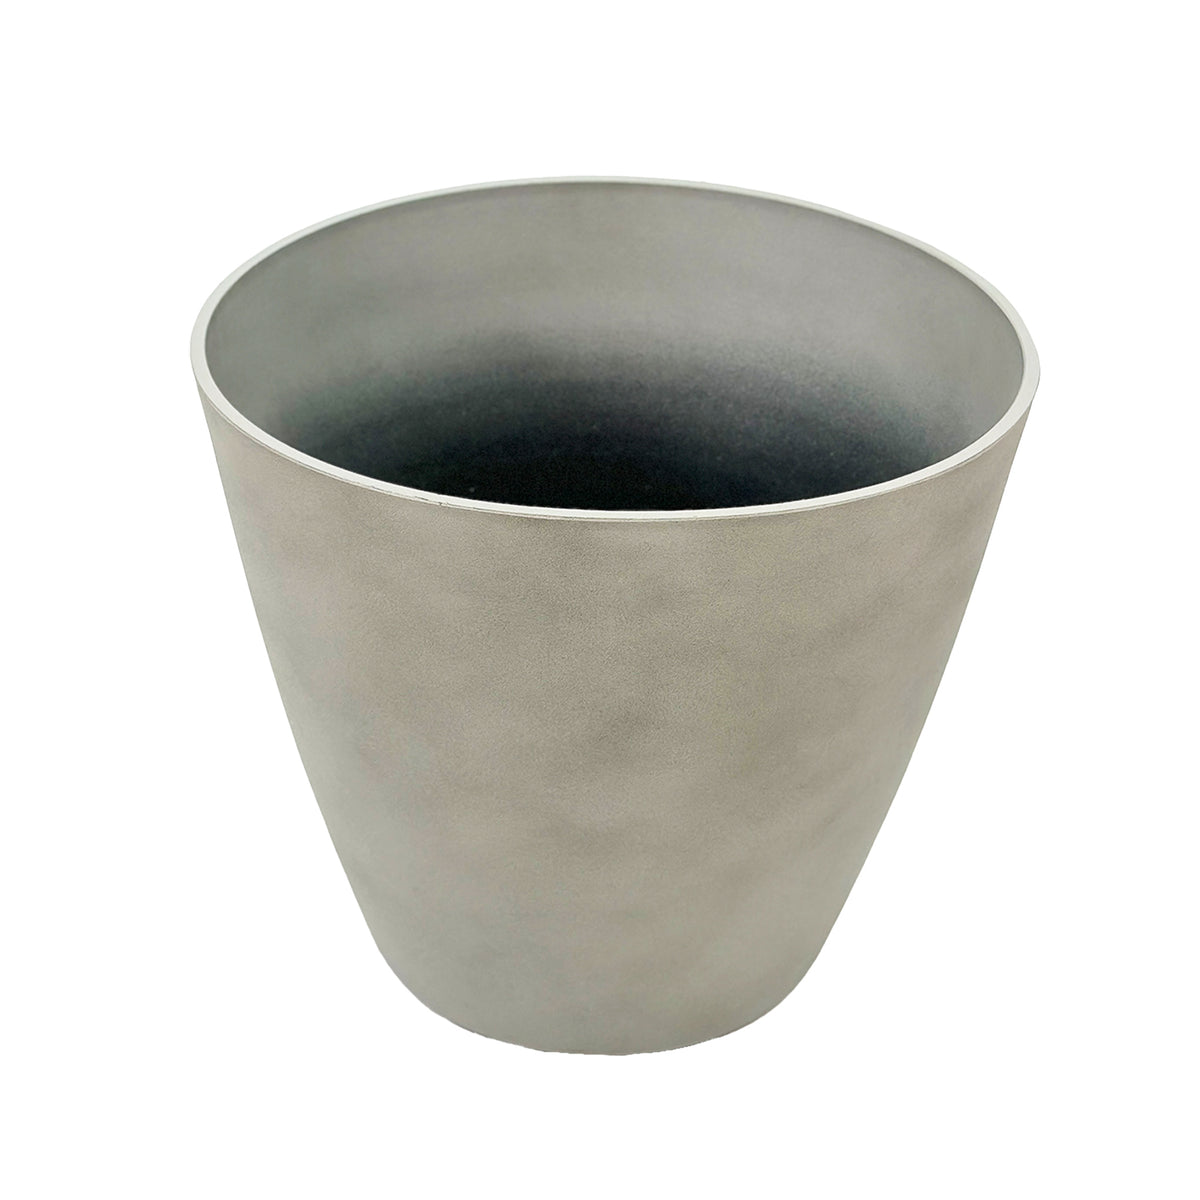 Essex Planter 50cm, Cement texture.Can be used indoors and outdoors, Light weight, Eco friendly and weather resistant, Front view.